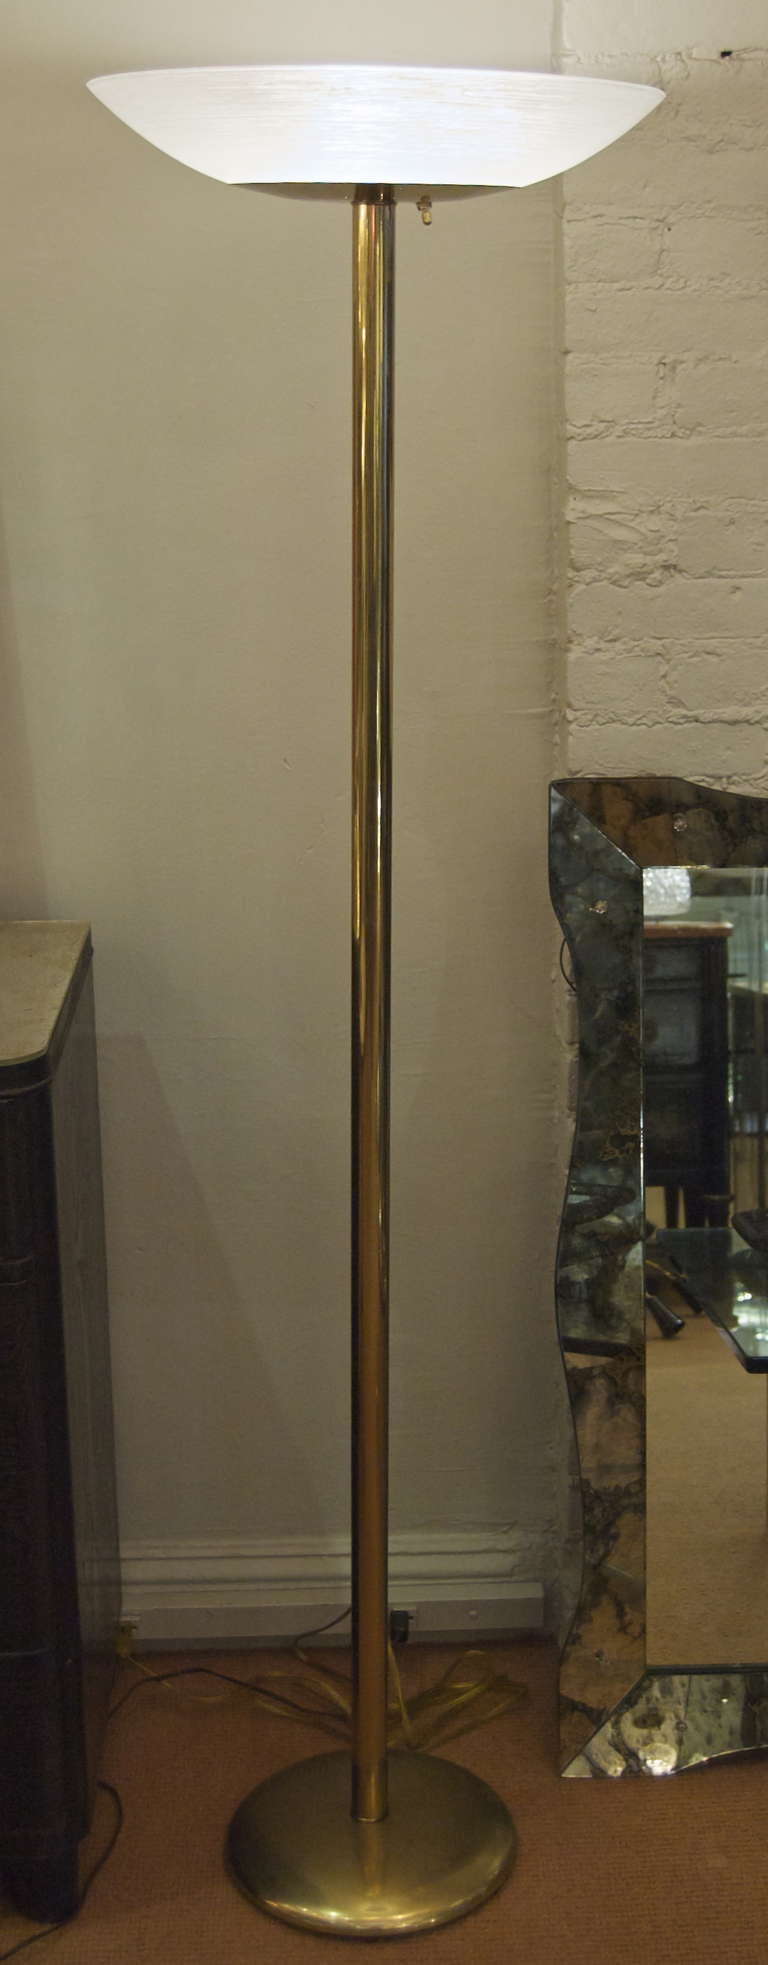 Beautiful and streamline brass tall lamp with textured glass shade.
3x75wts
3 way switch, new wiring.